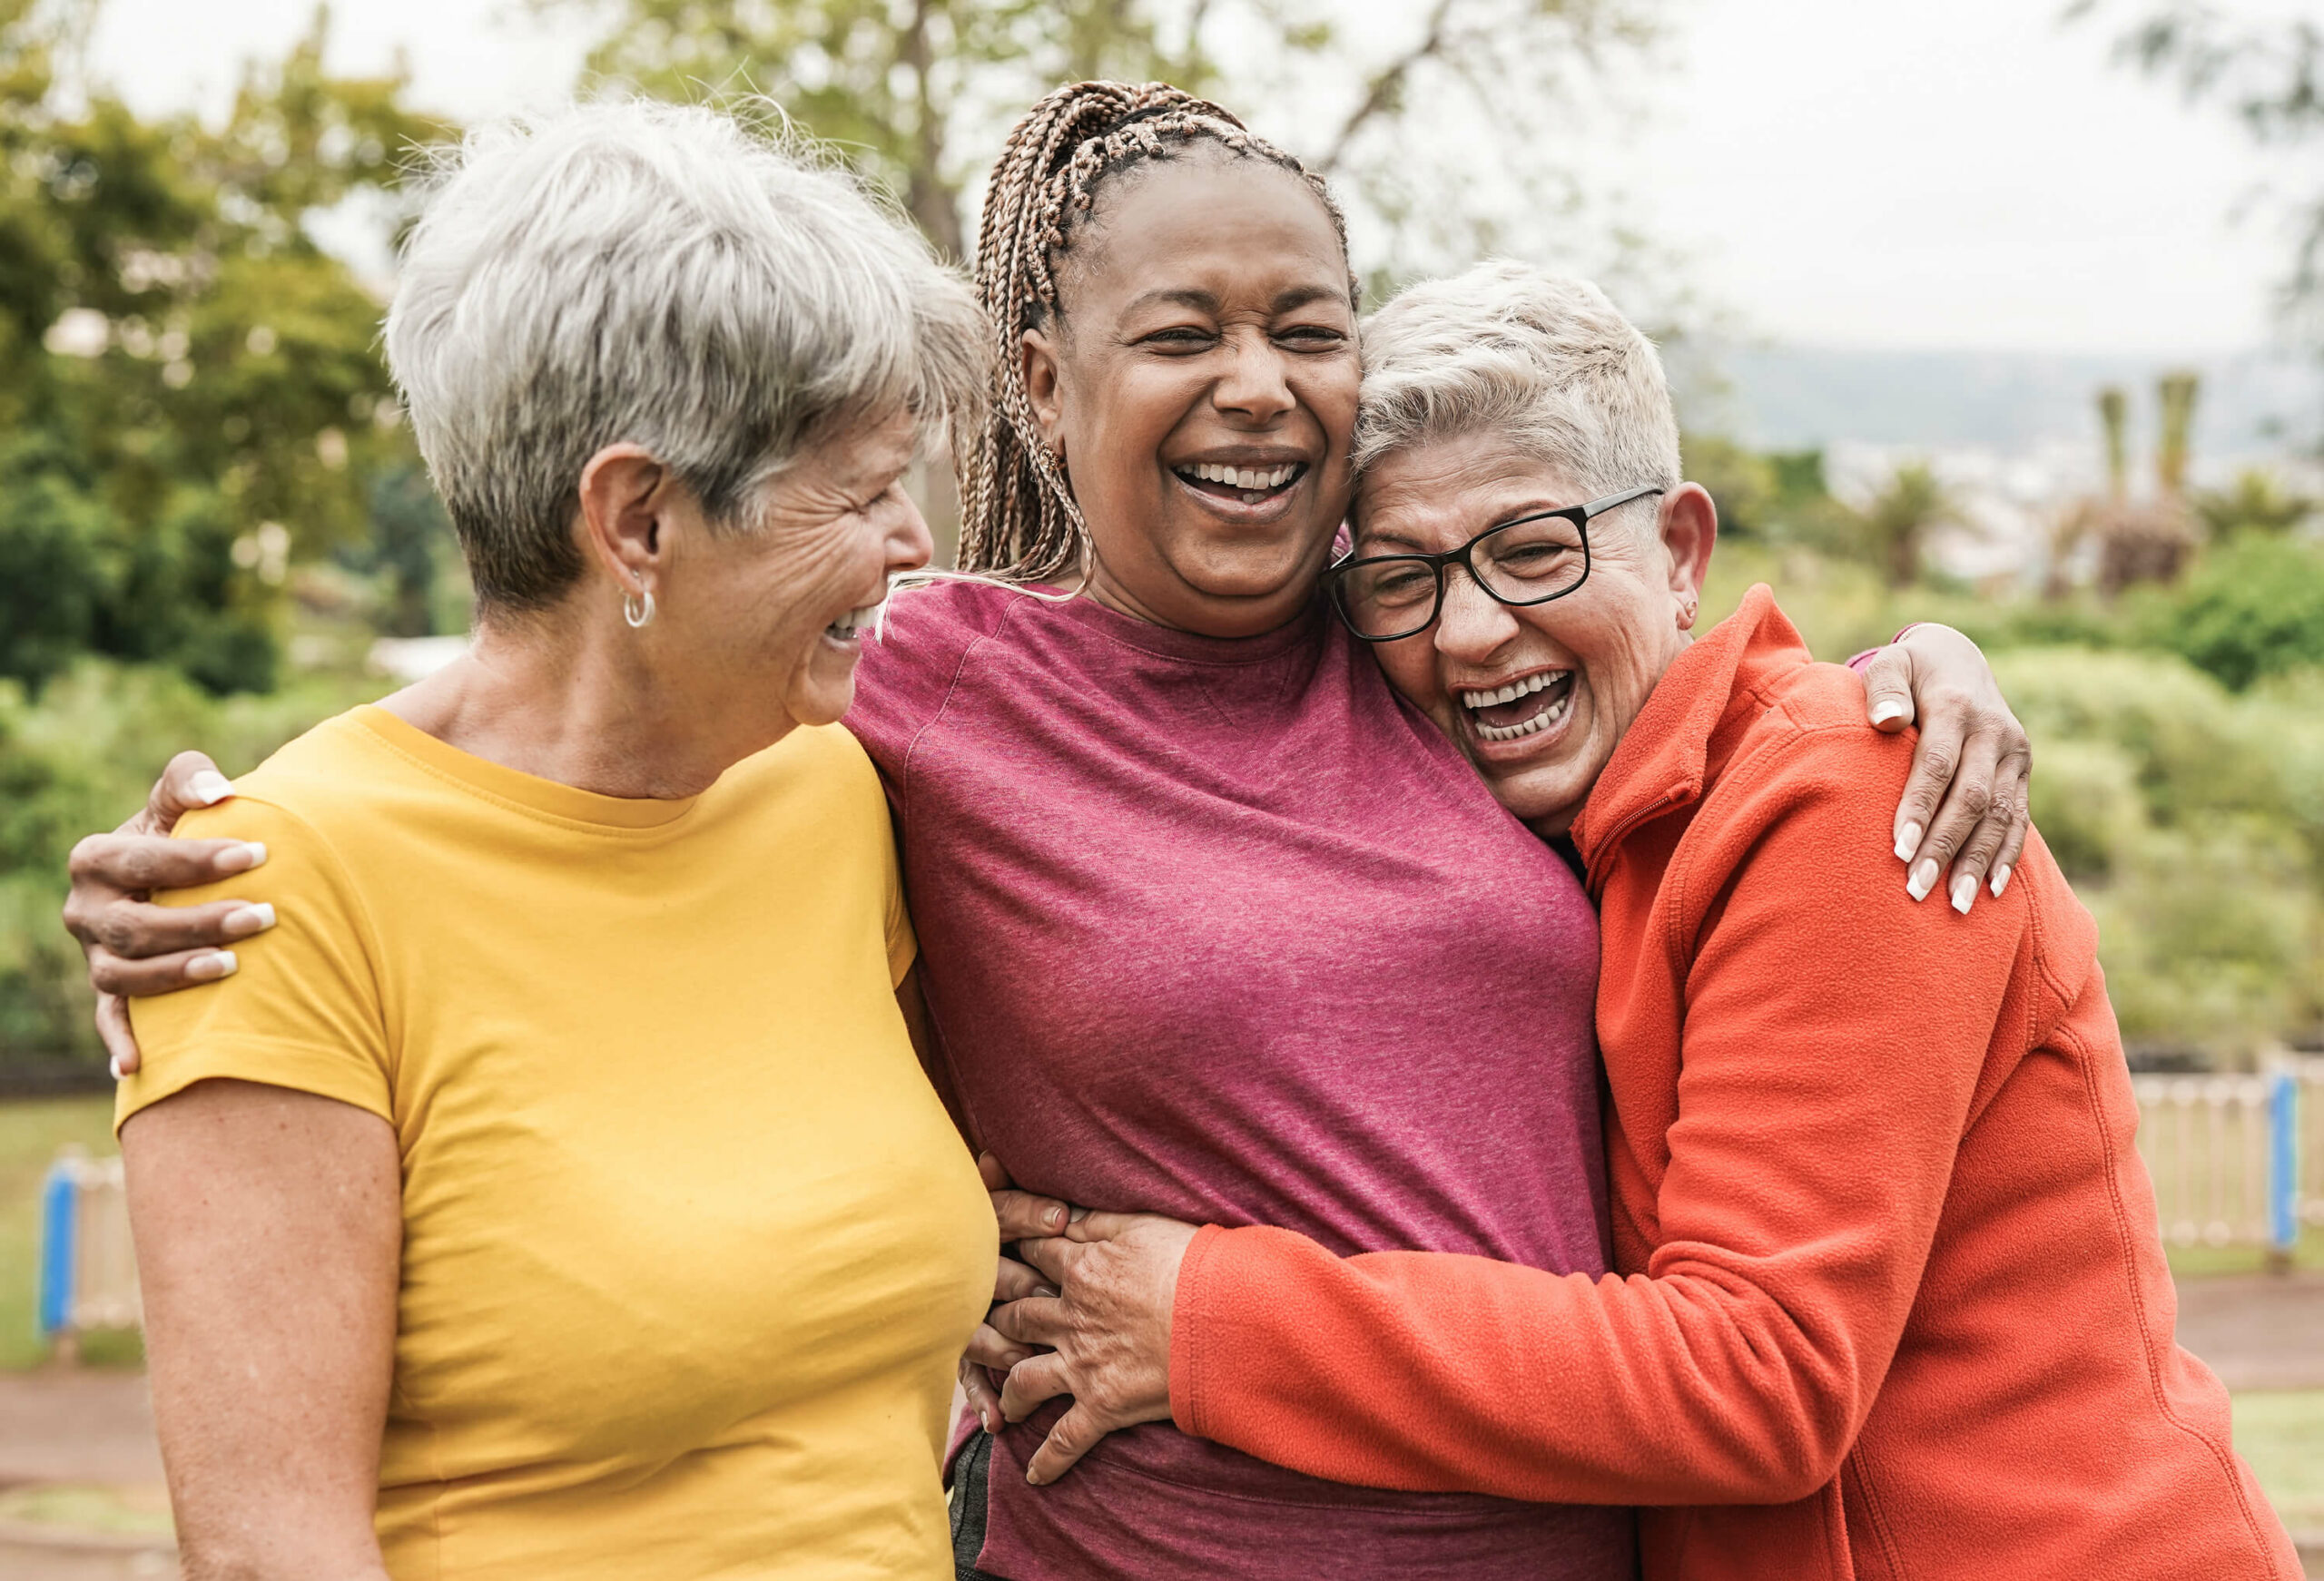 Three older adults women friends outdoors in a park embracing each other and laughing.